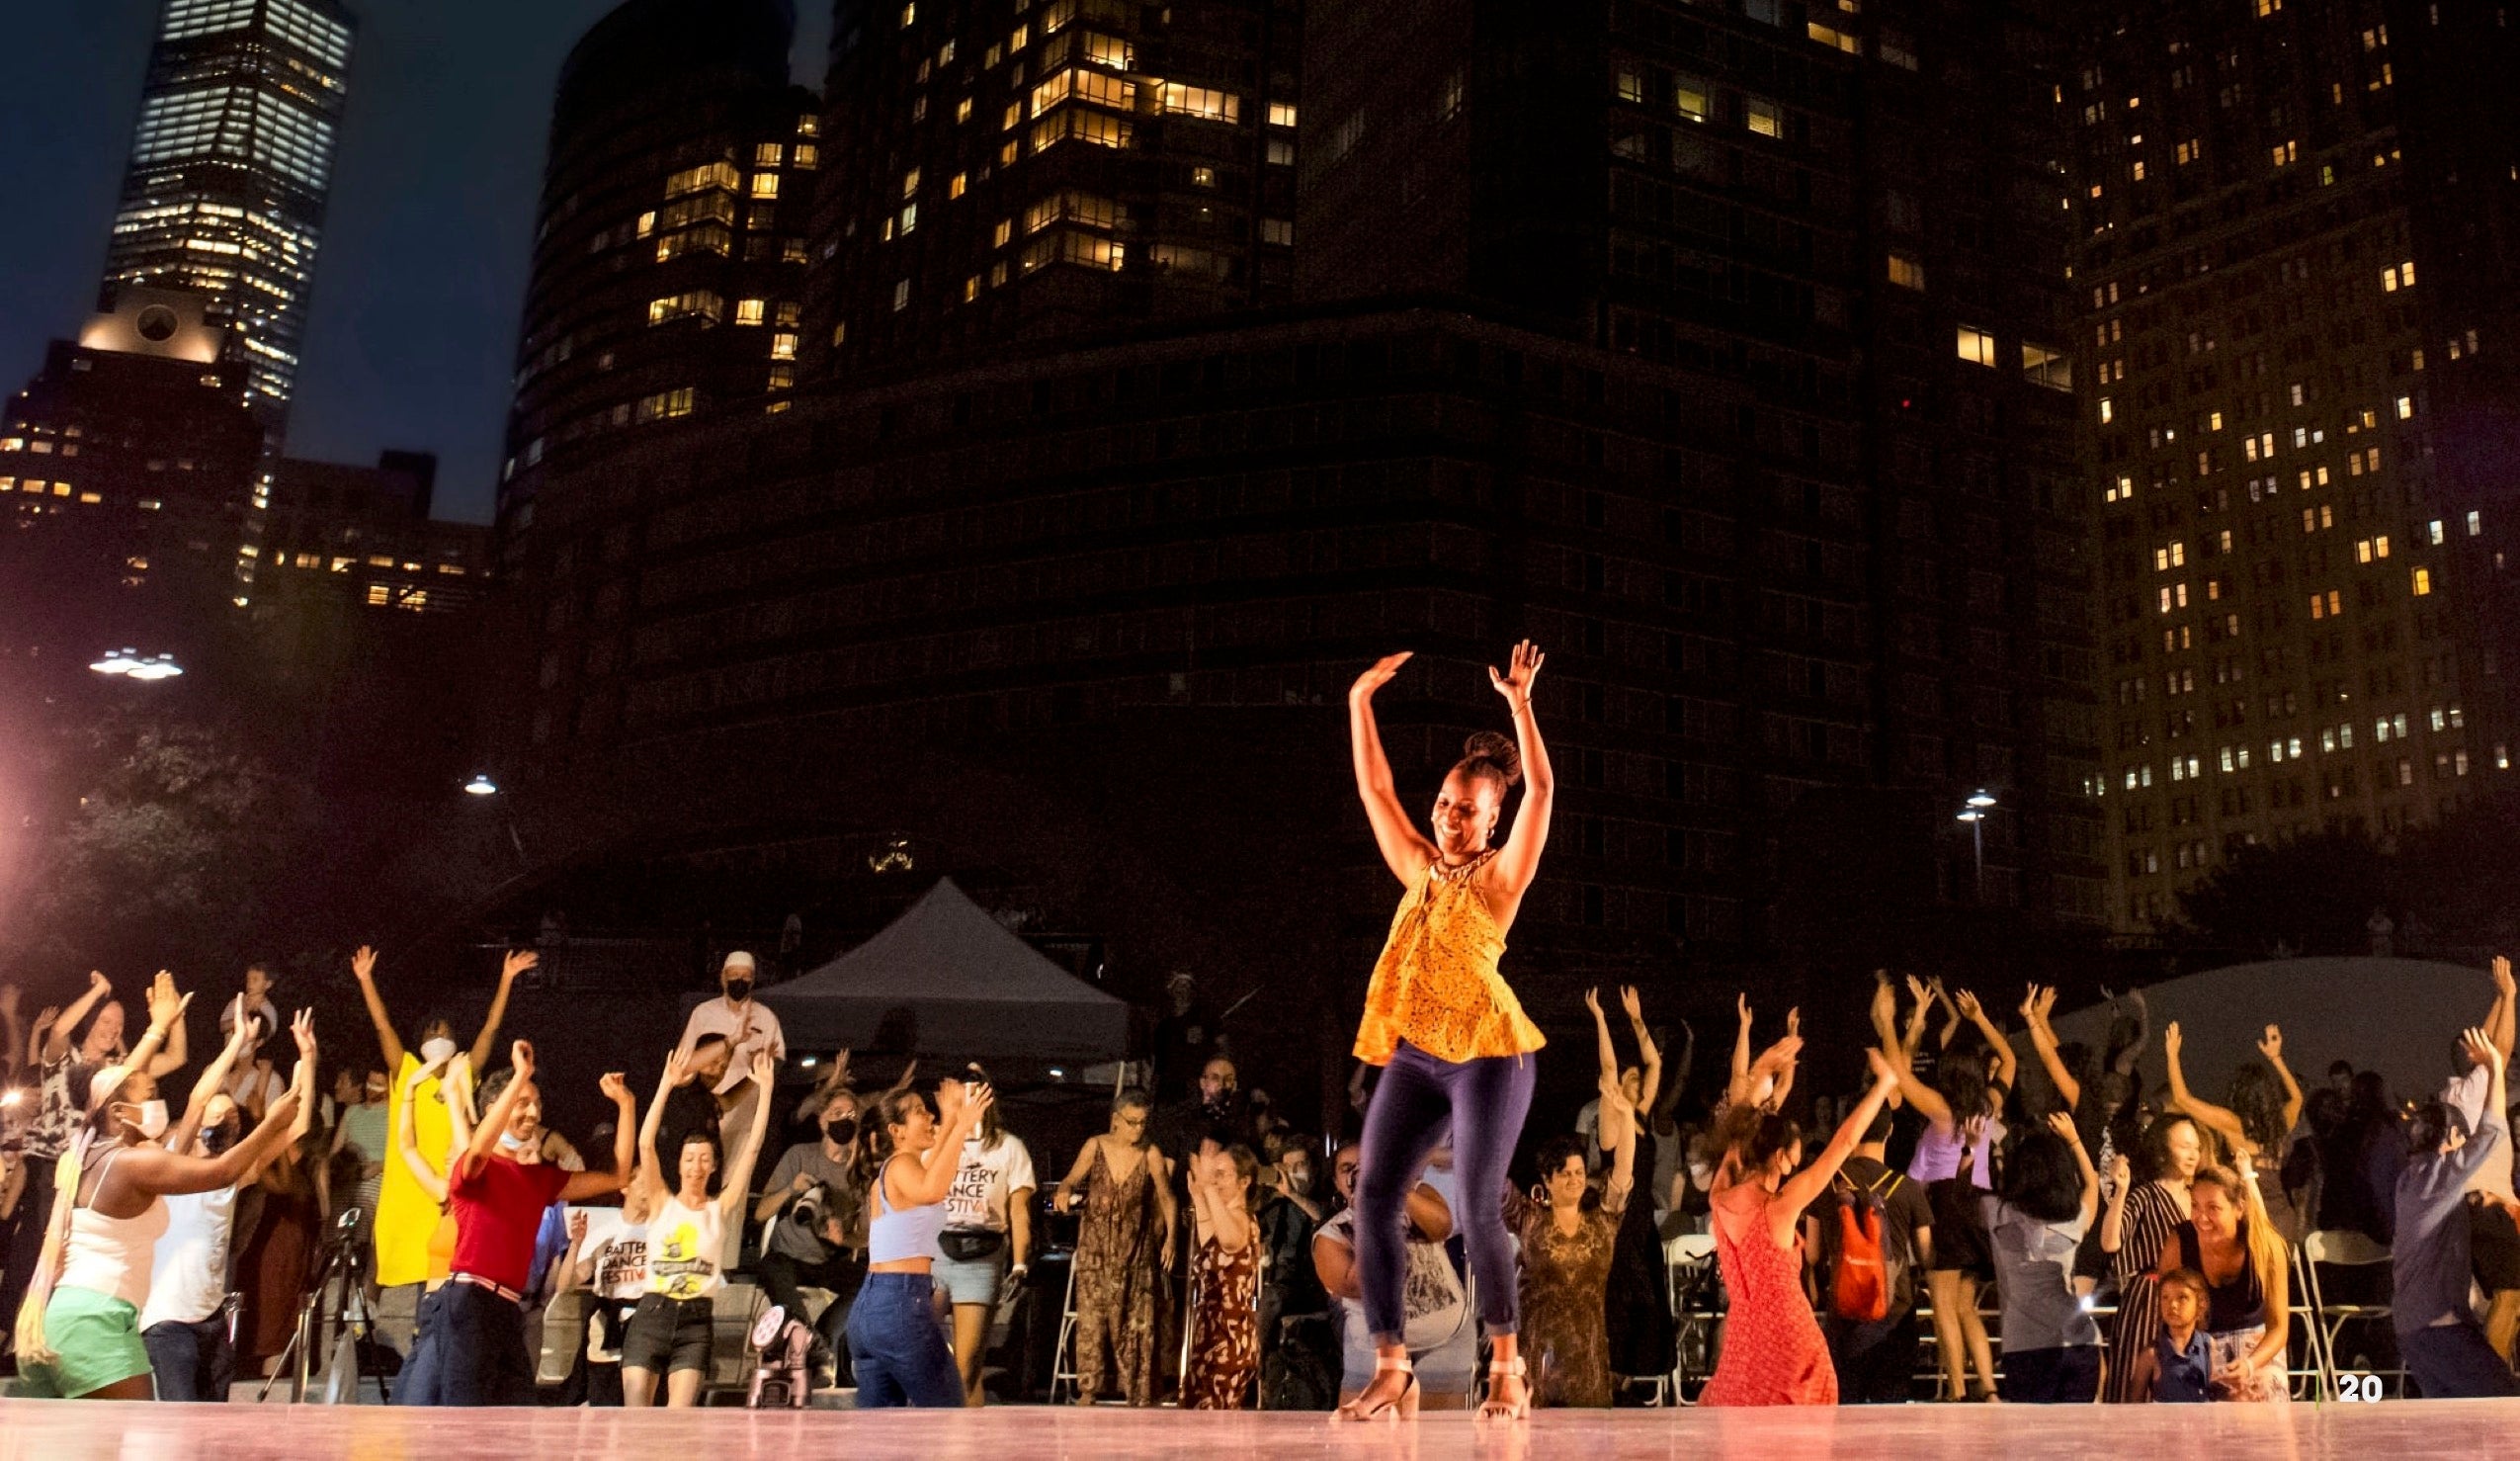 A Black woman dances on stage in front of high-rise buildings while her community cheers her on.